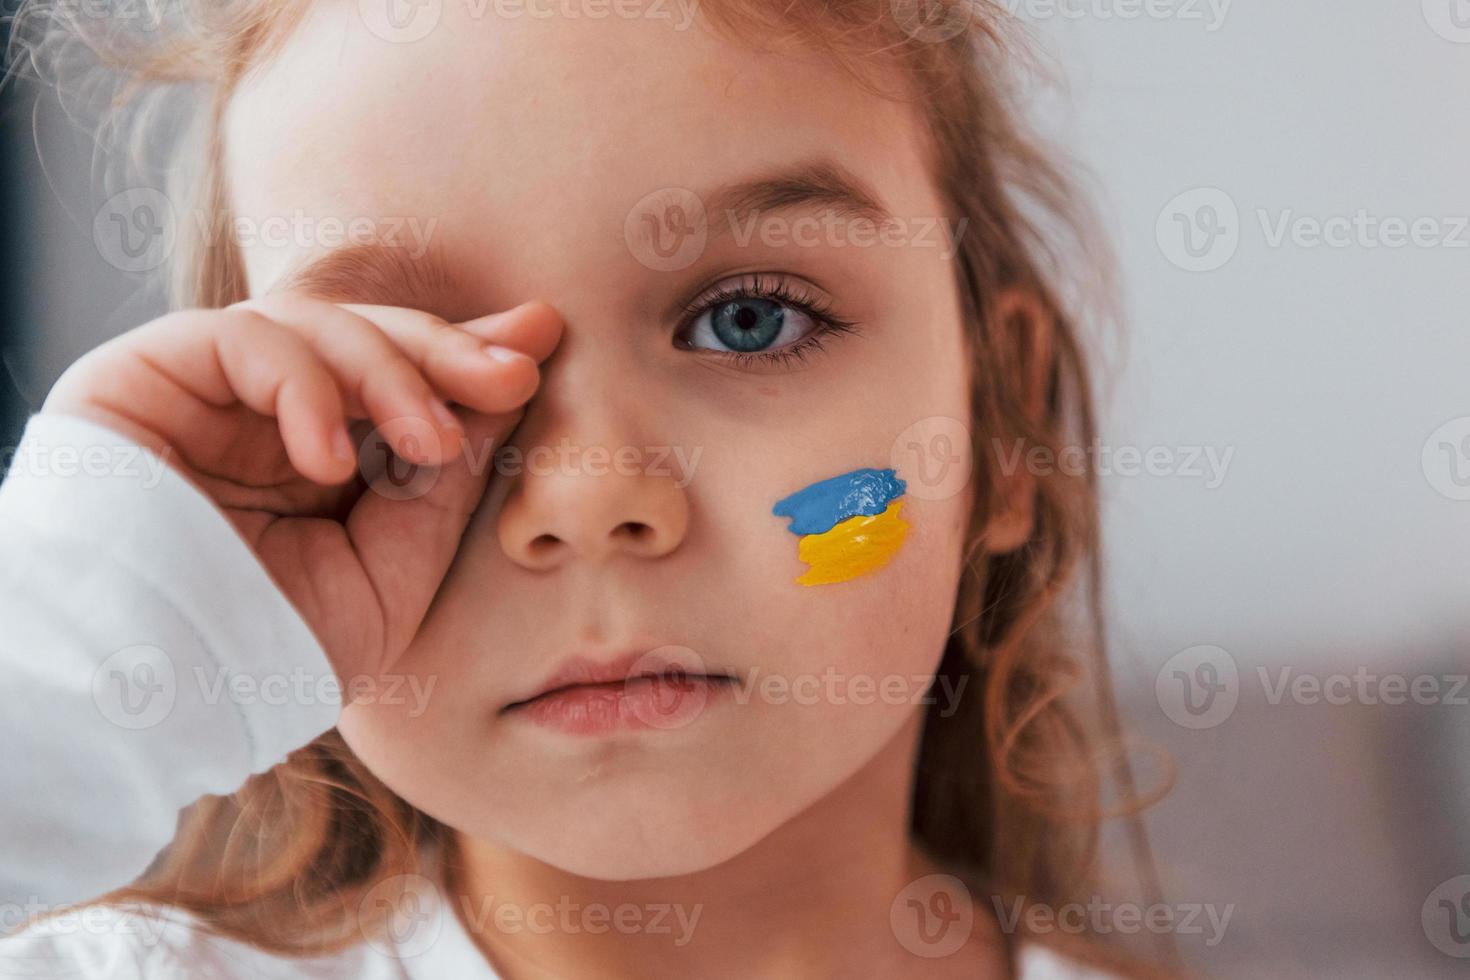 Innocent child is crying. Portrait of little girl with Ukrainian flag make up on the face photo